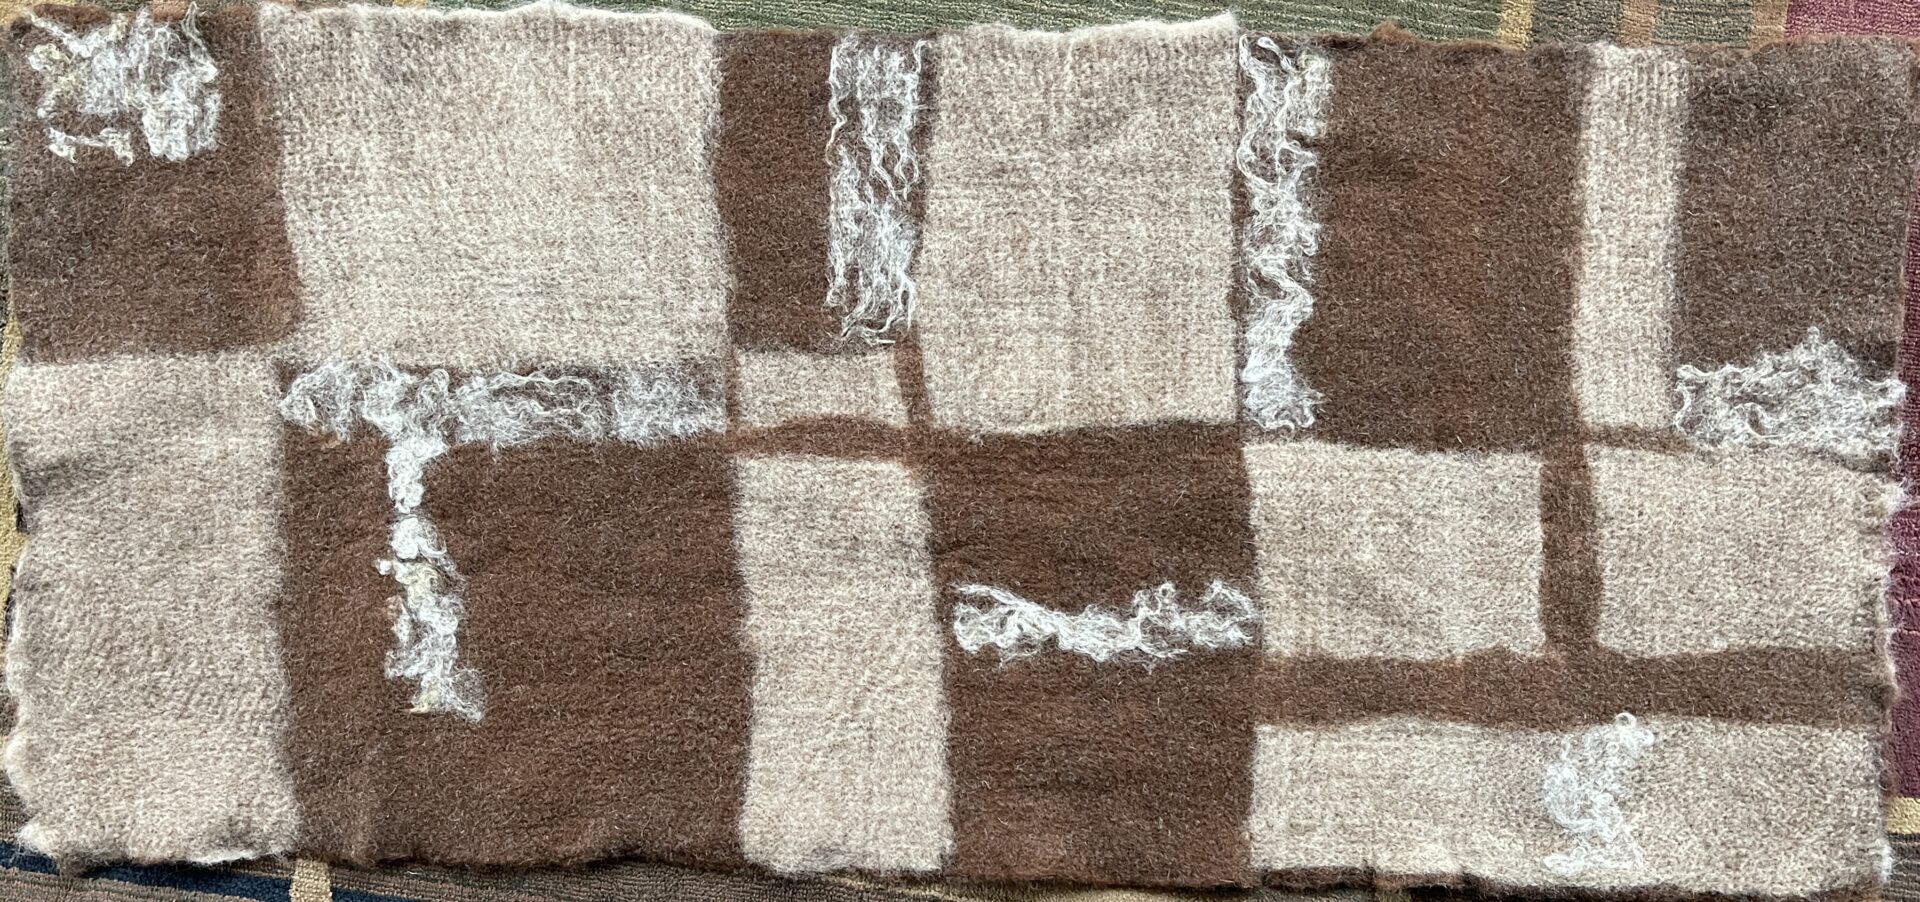 A close up of the brown and white squares